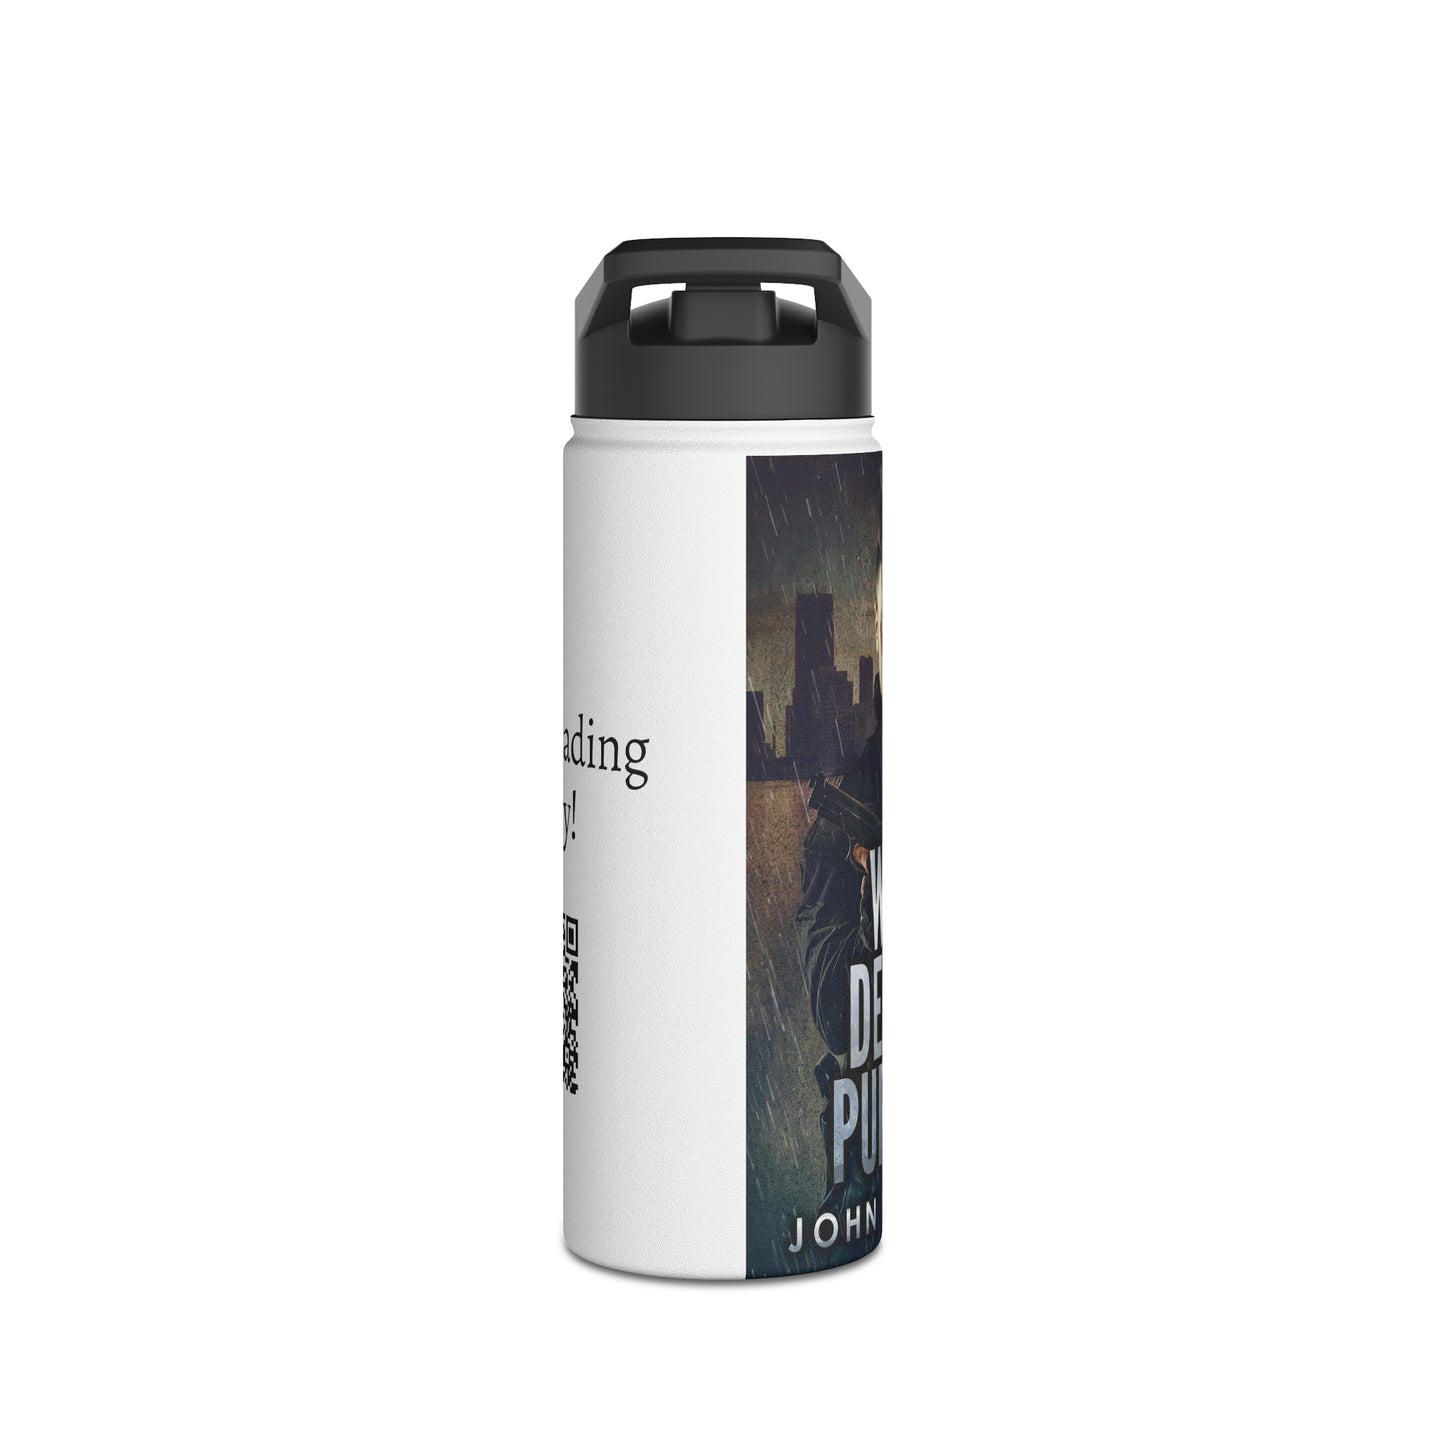 With Deadly Purpose - Stainless Steel Water Bottle